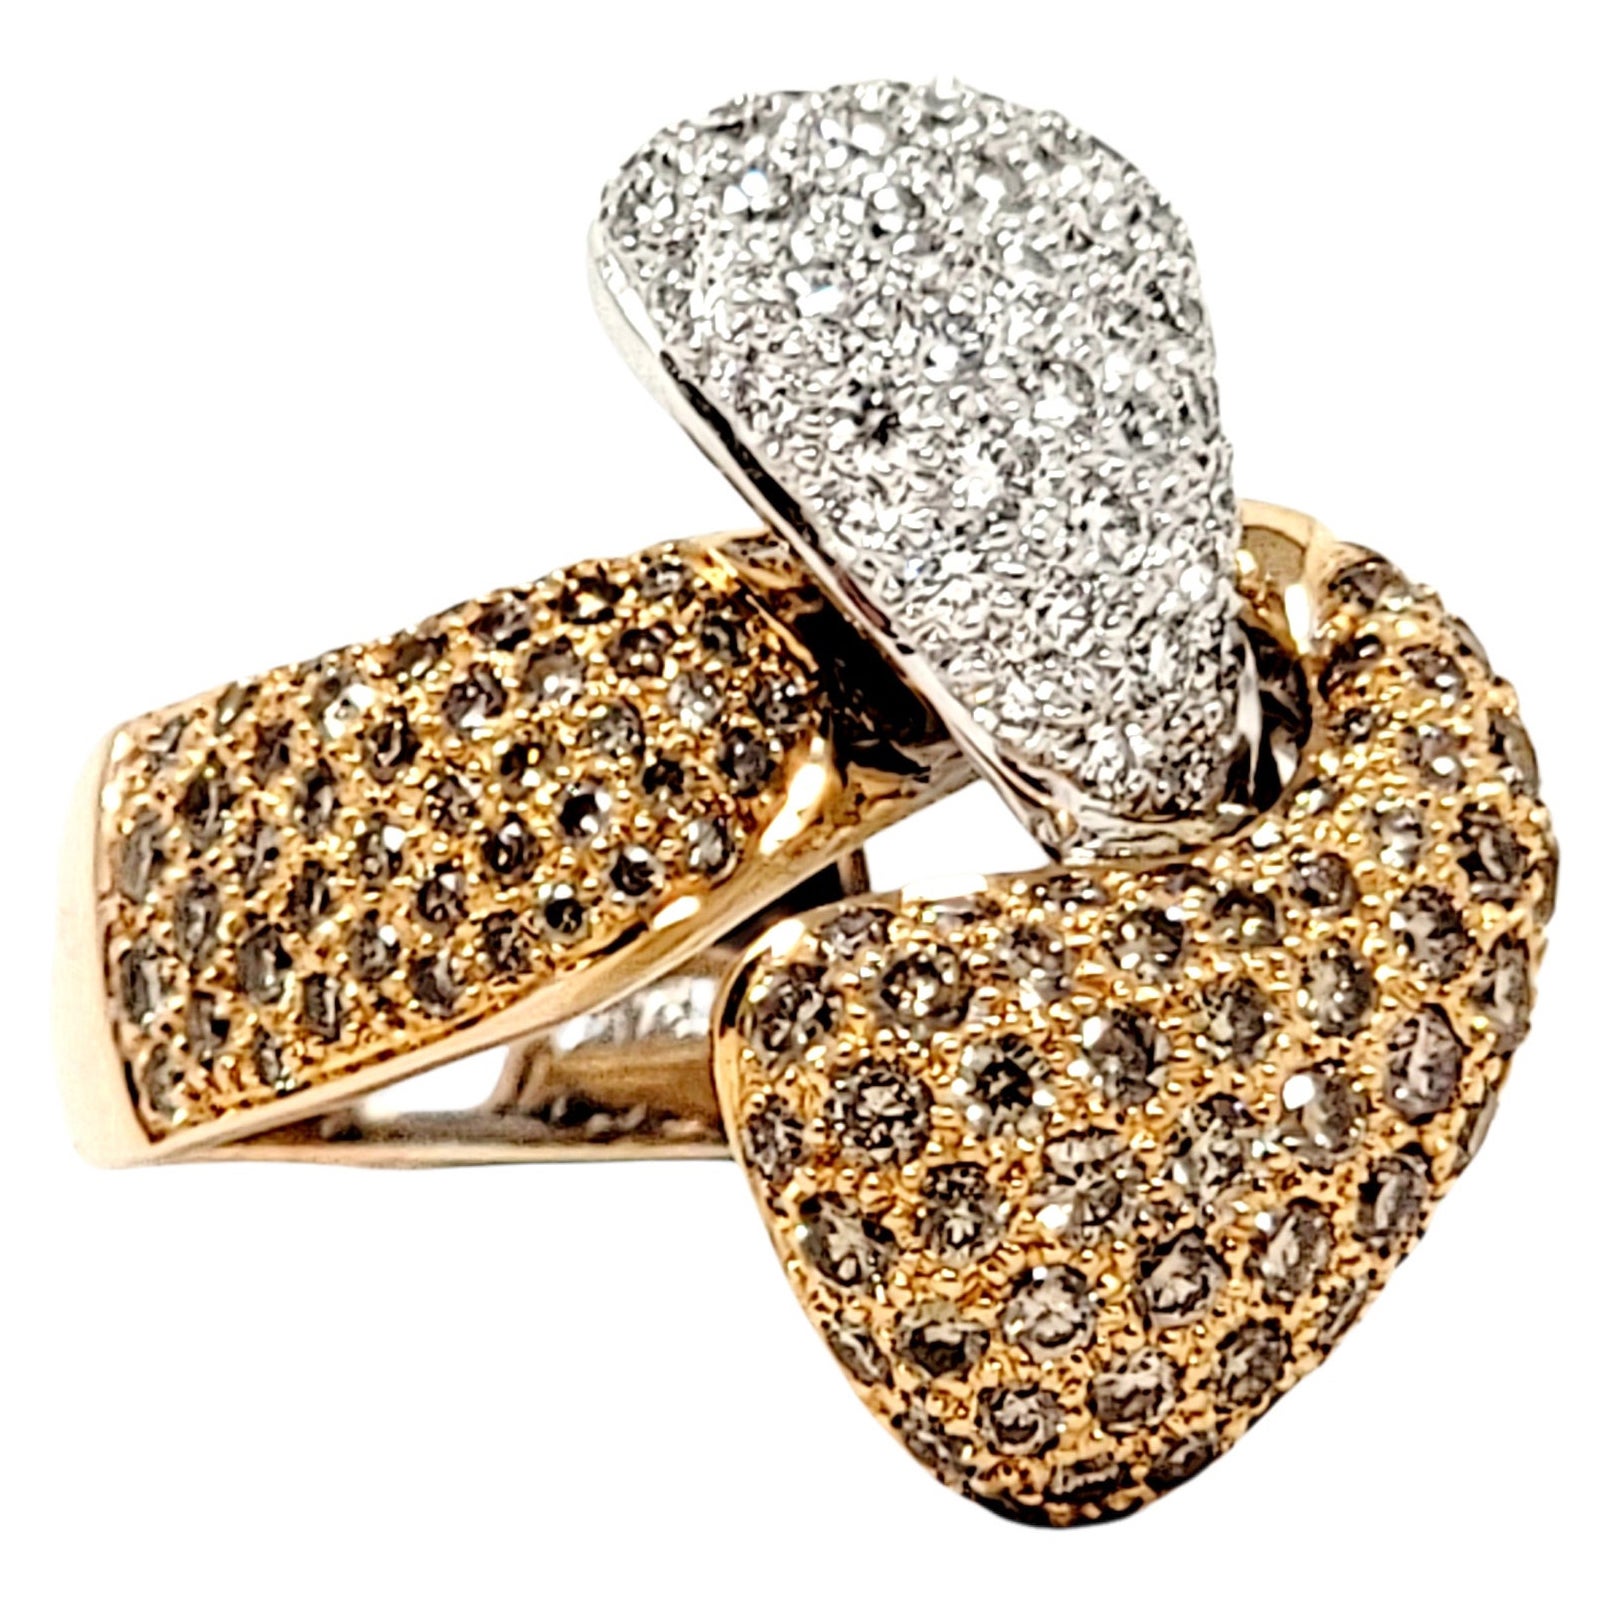 Hans D. Kreiger Brown and White Pave Diamond Bypass Ring Two-Tone 18 Karat Gold